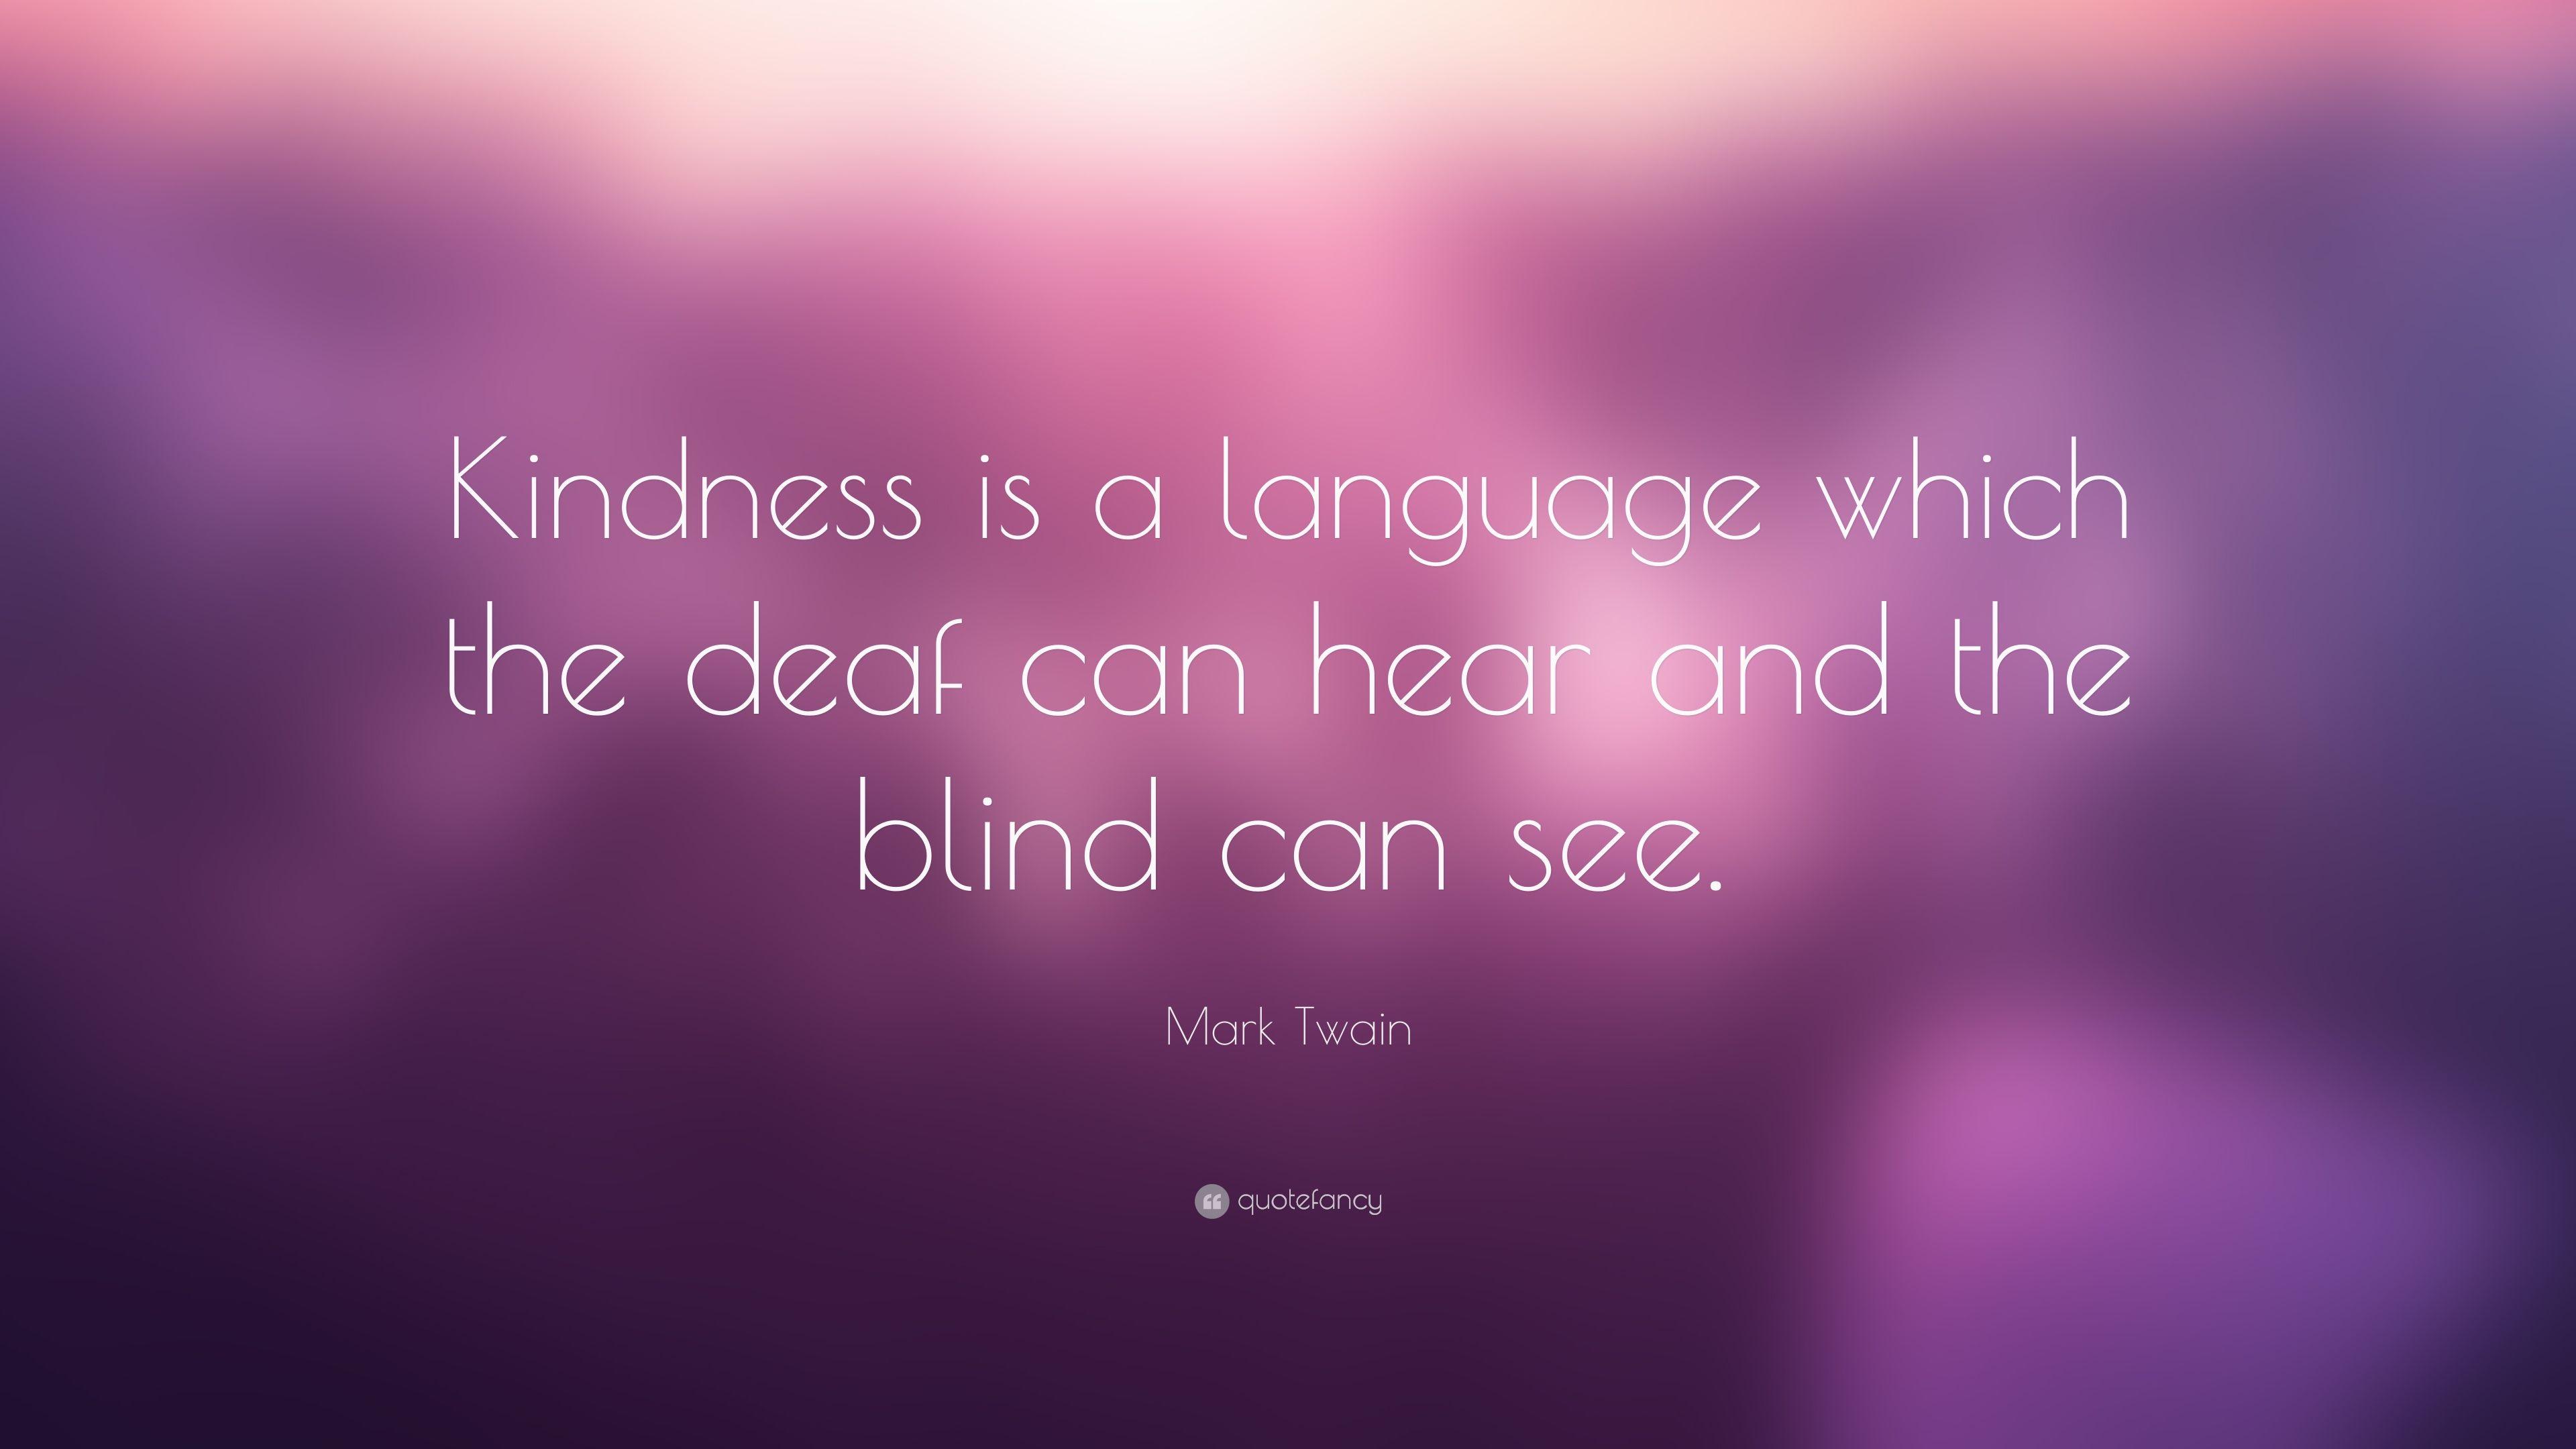 Mark Twain Quote: “Kindness is a language which the deaf can hear